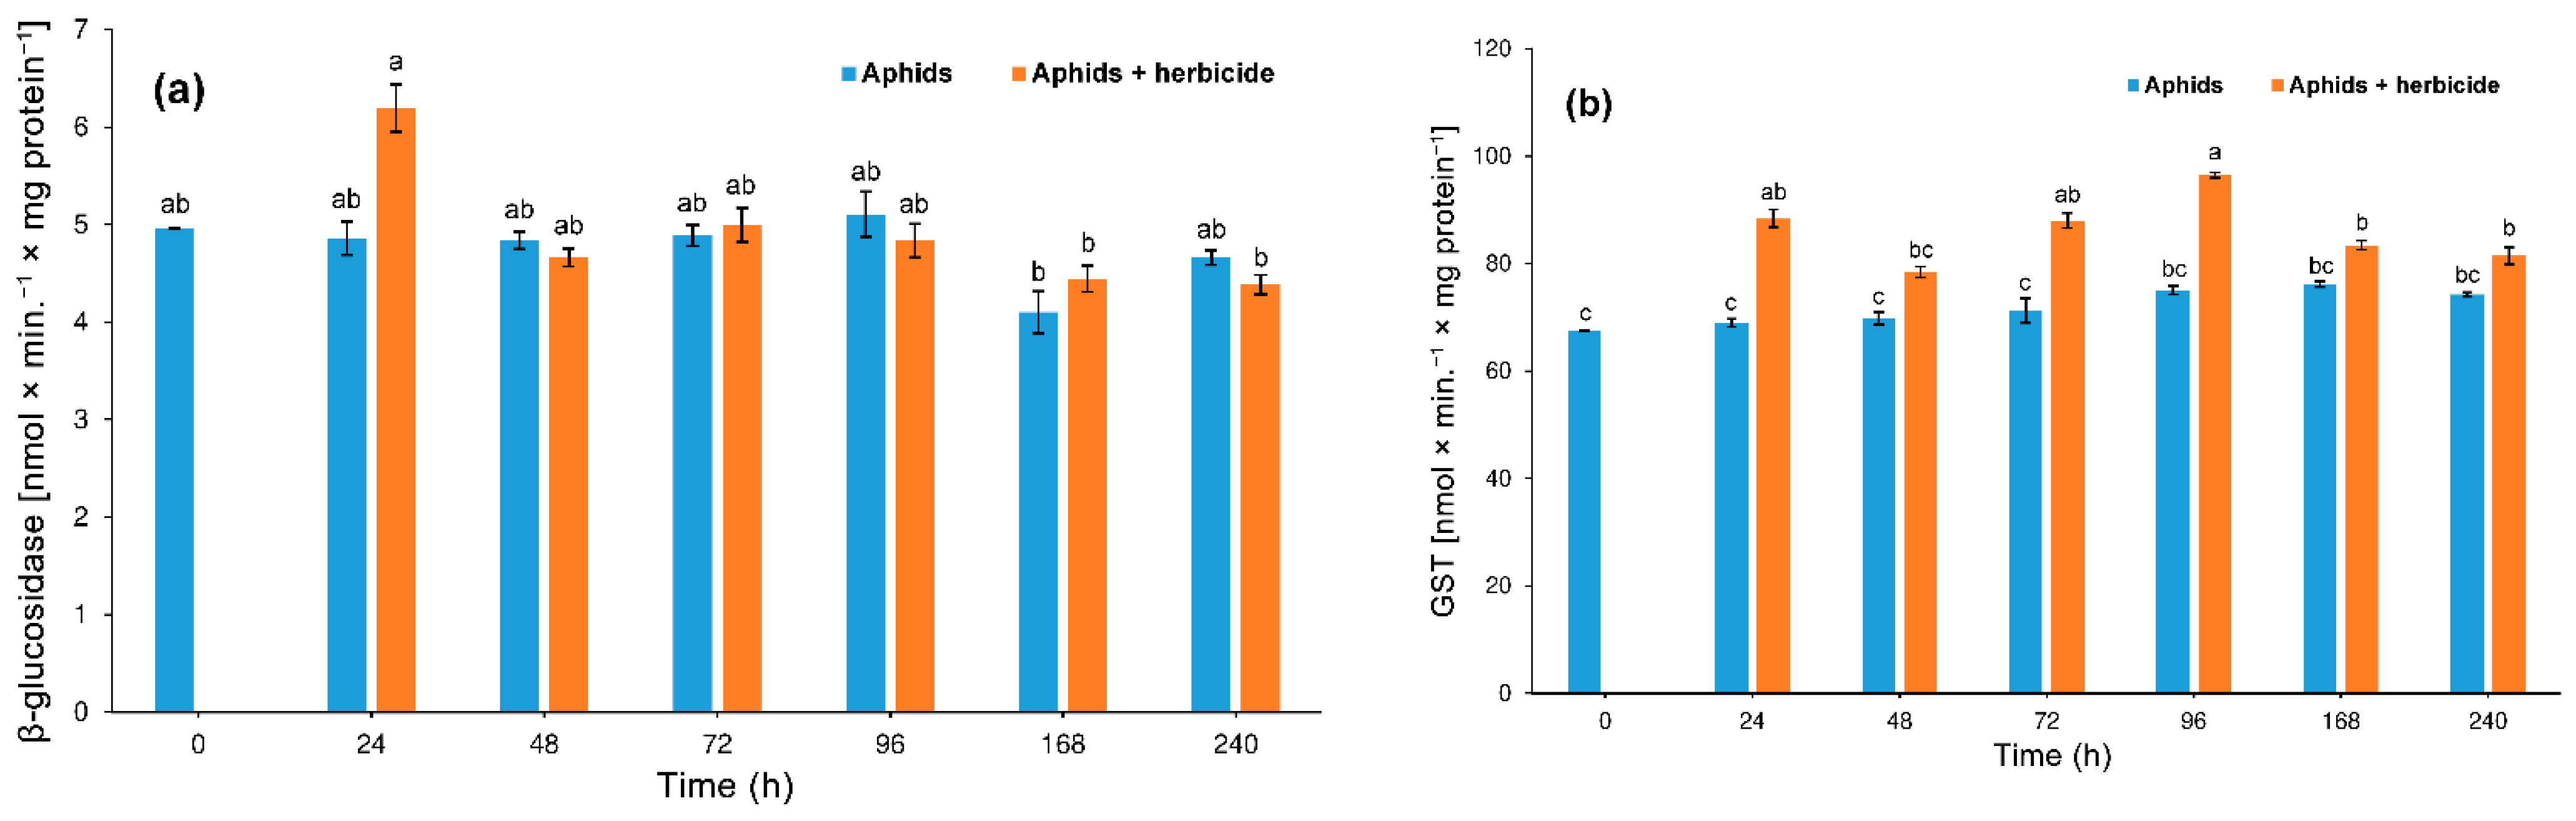 Xn 2018 Pdf - Insects | Free Full-Text | Mild Abiotic Stress Affects Development and  Stimulates Hormesis of Hemp Aphid Phorodon cannabis